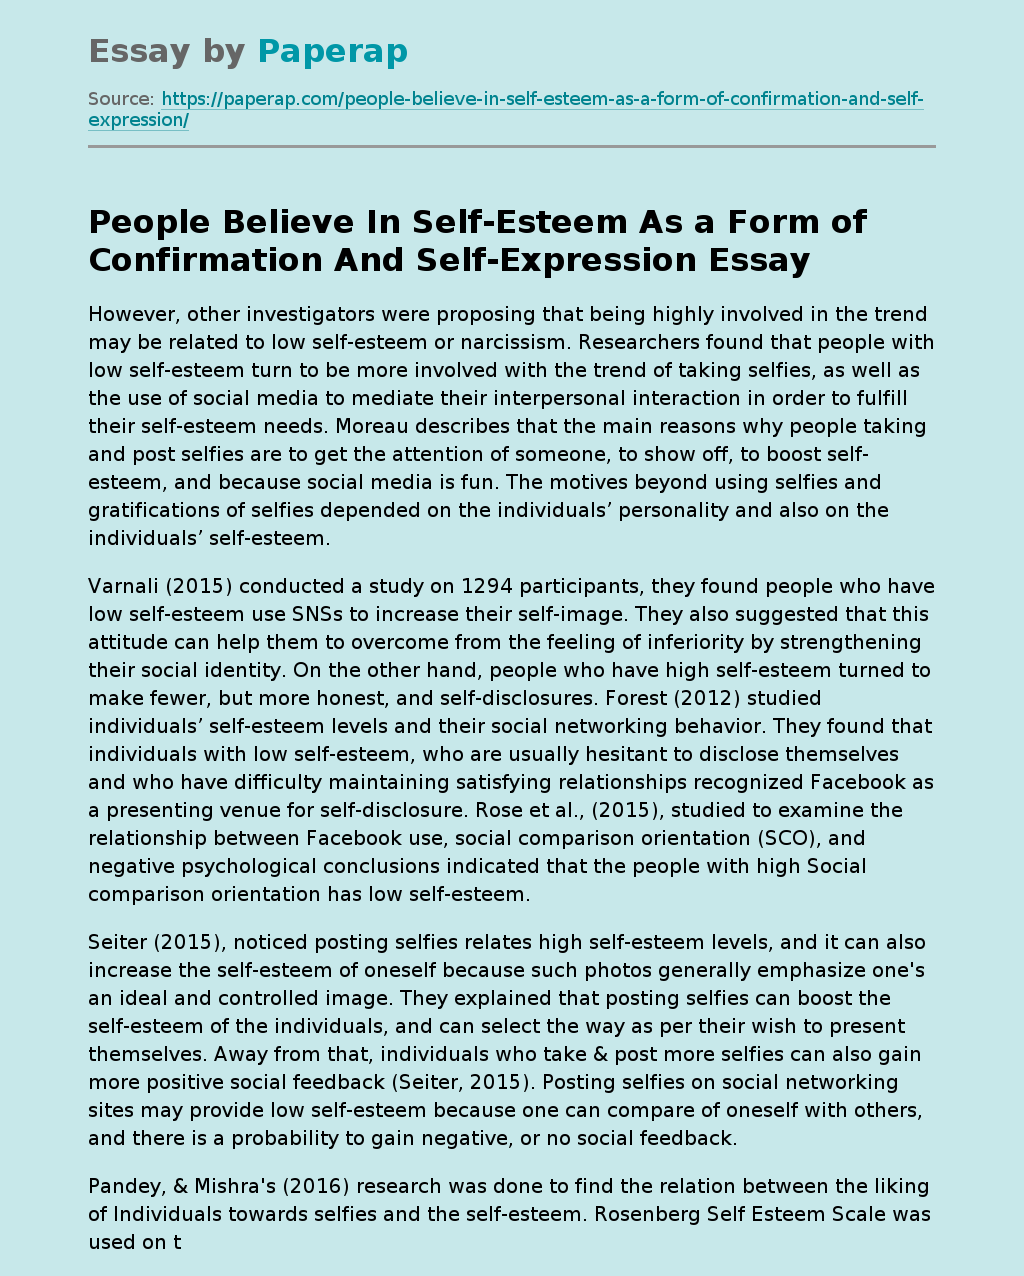 People Believe In Self-Esteem As a Form of Confirmation And Self-Expression